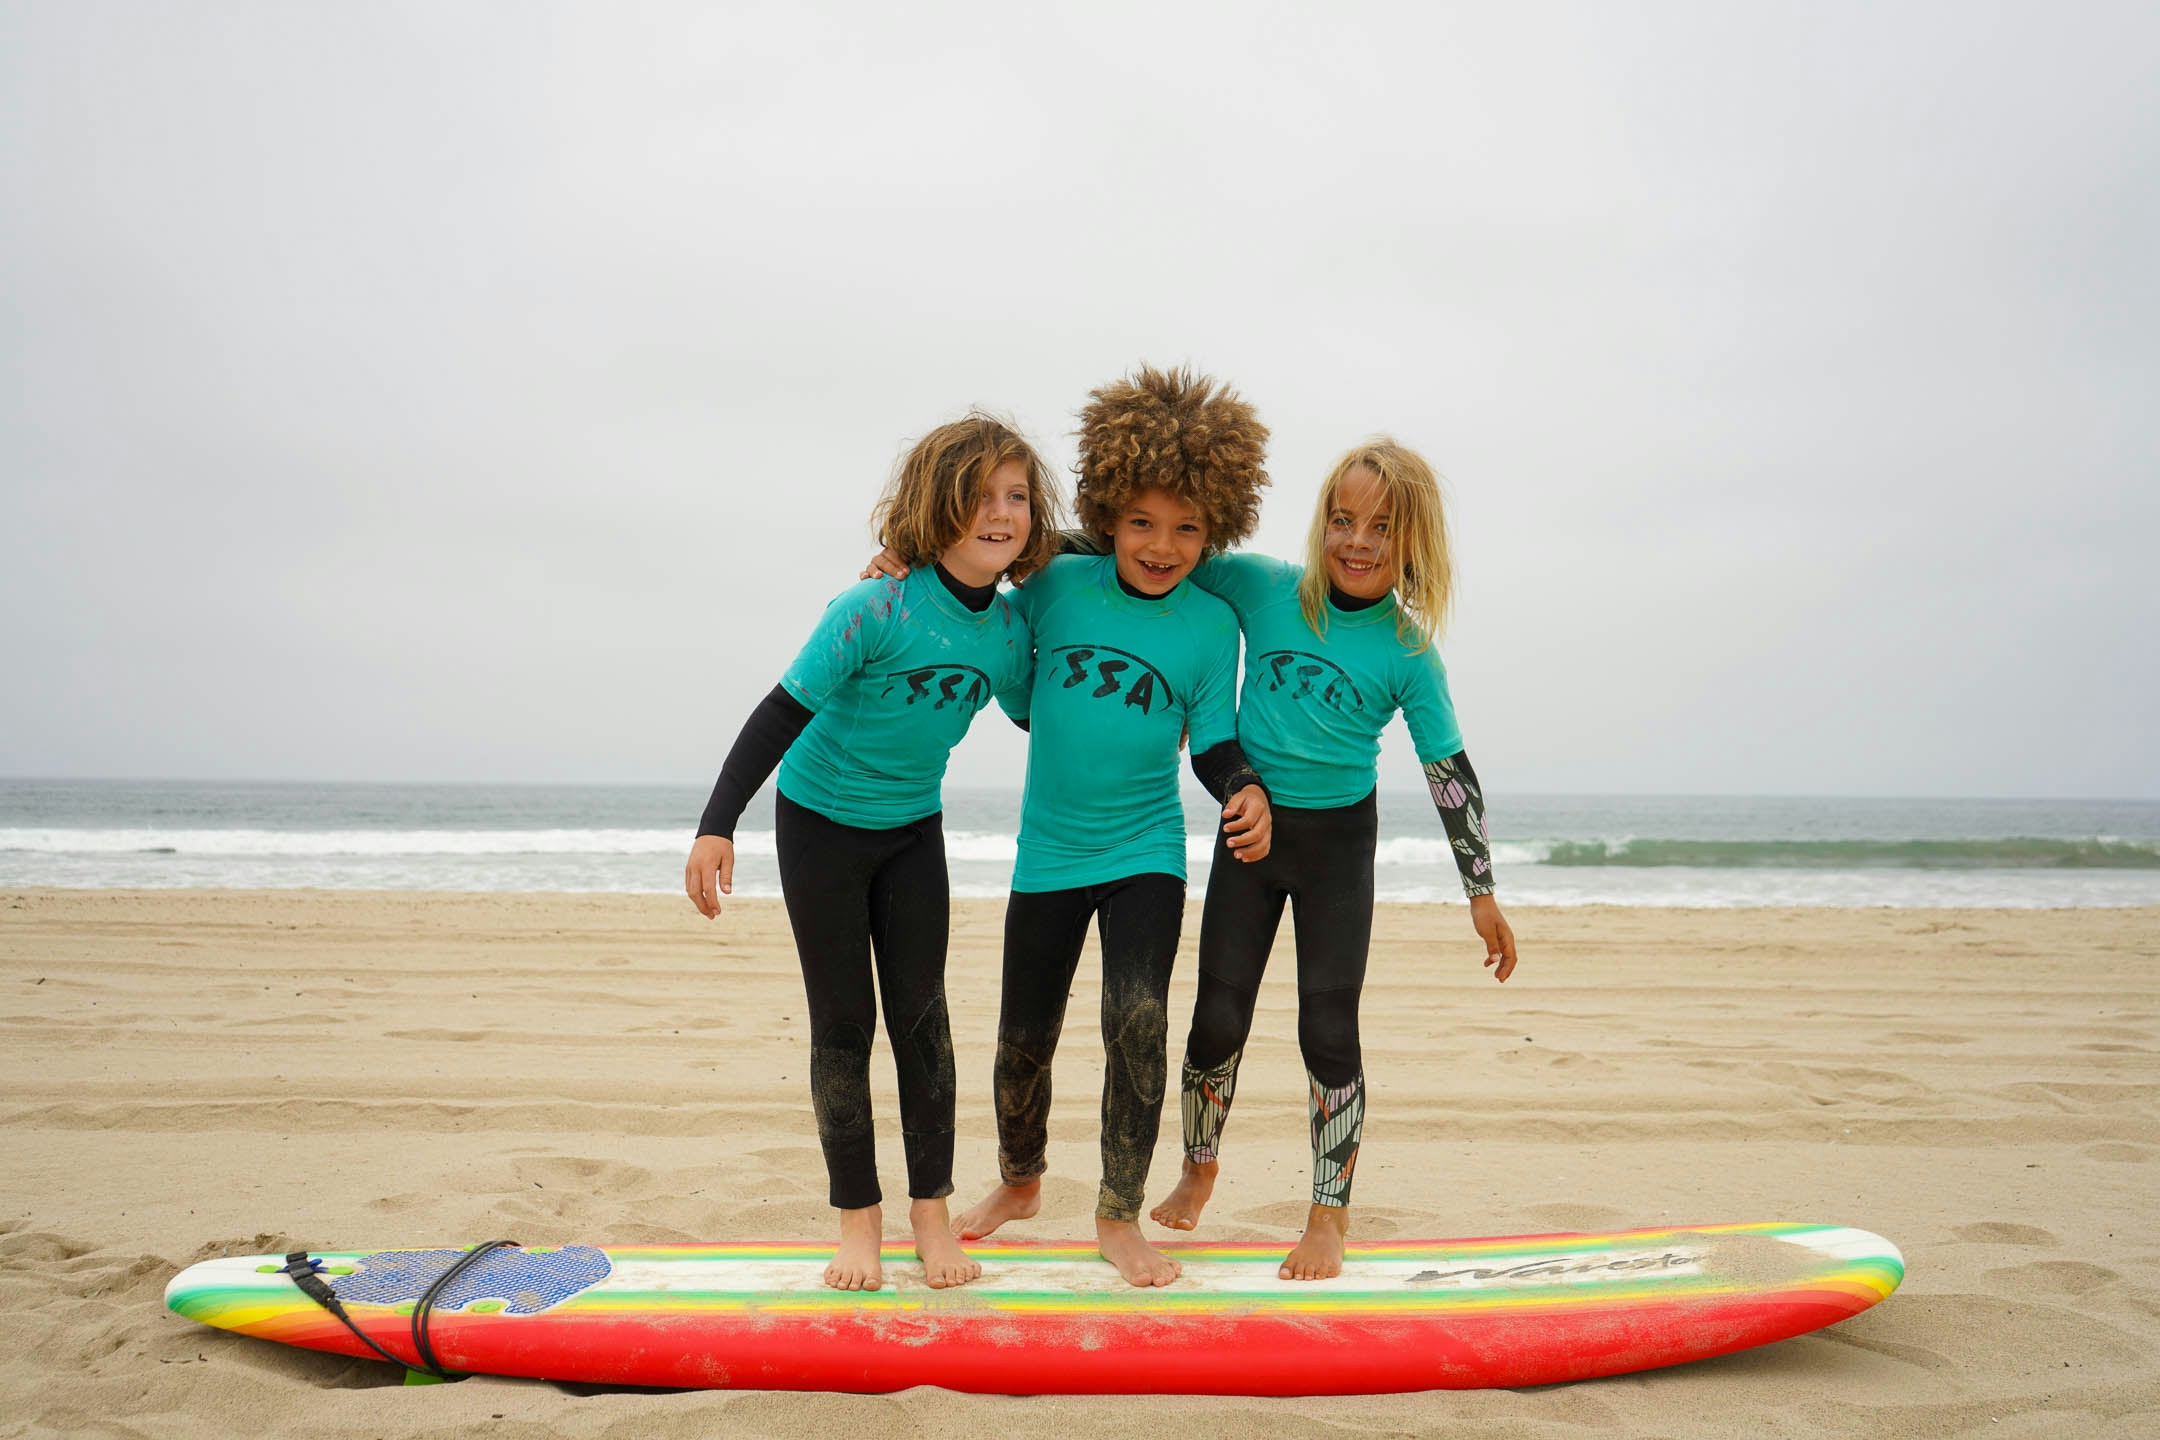 3 campers smiling with their arms around each other. They are standing on a surfboard on the beach with the ocean behind them.